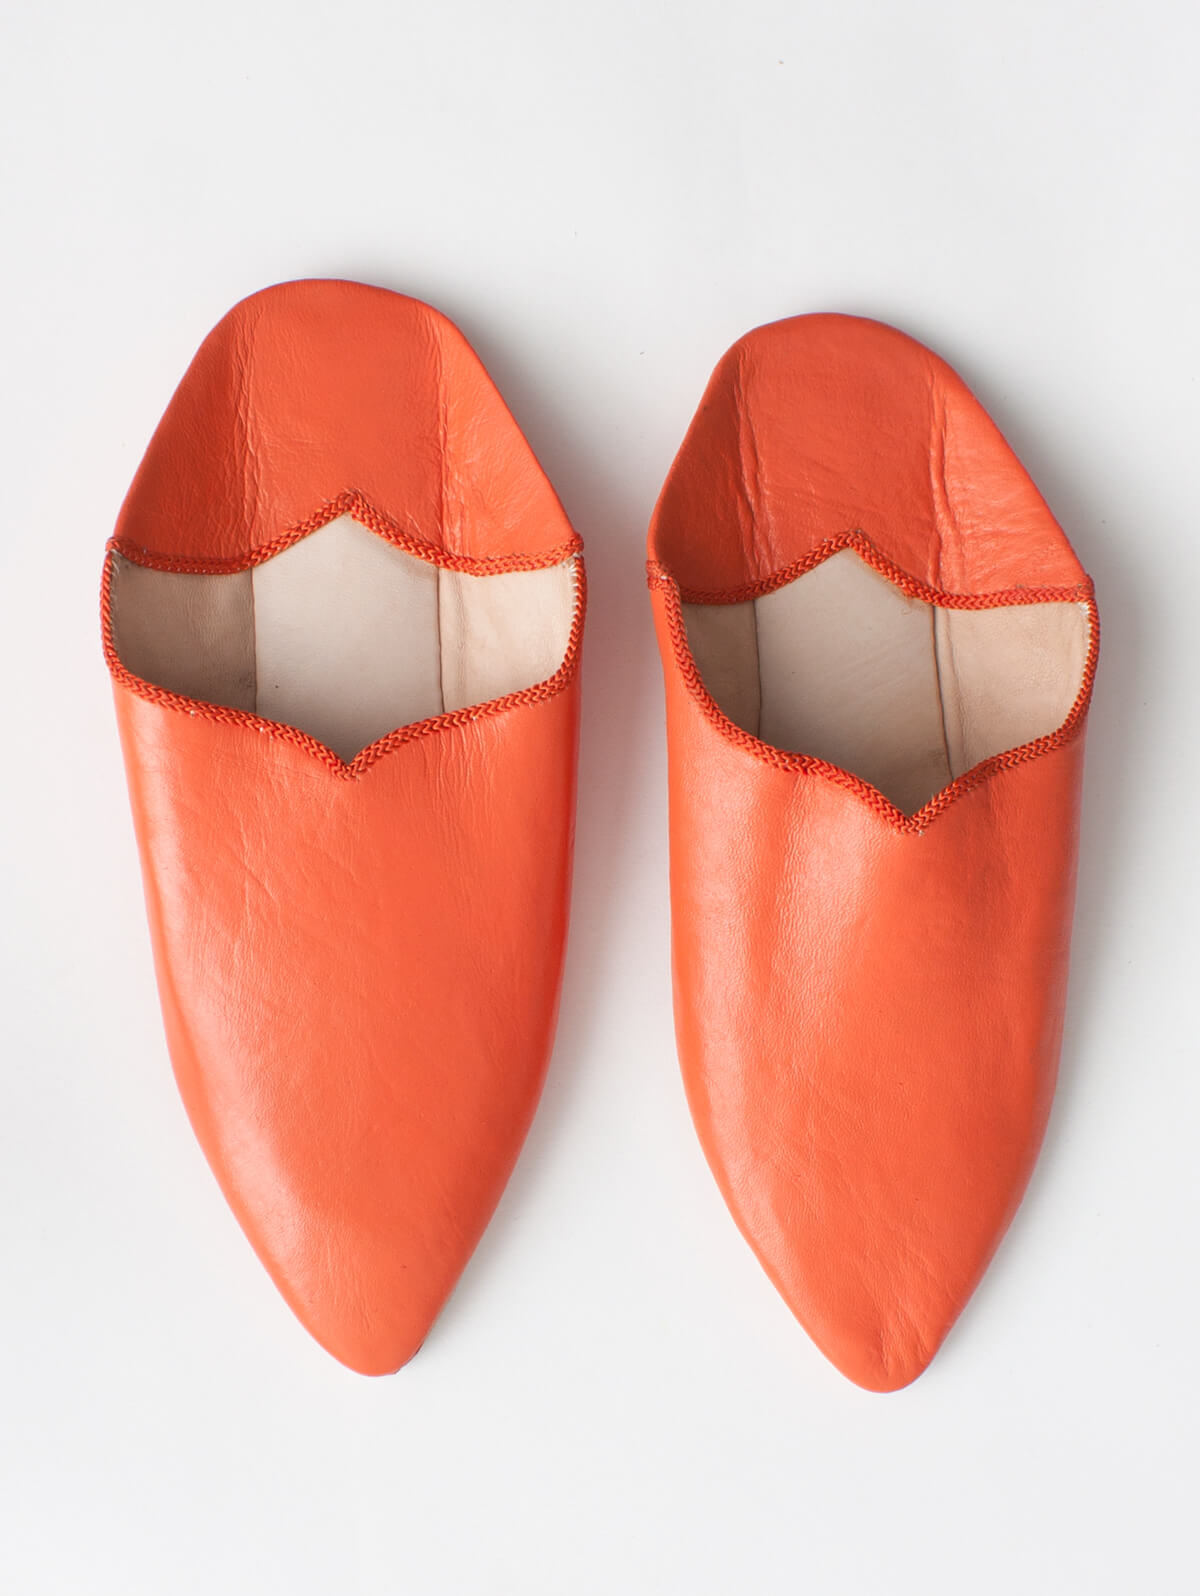 Moroccan Plain Pointed Babouche Slippers, Orange